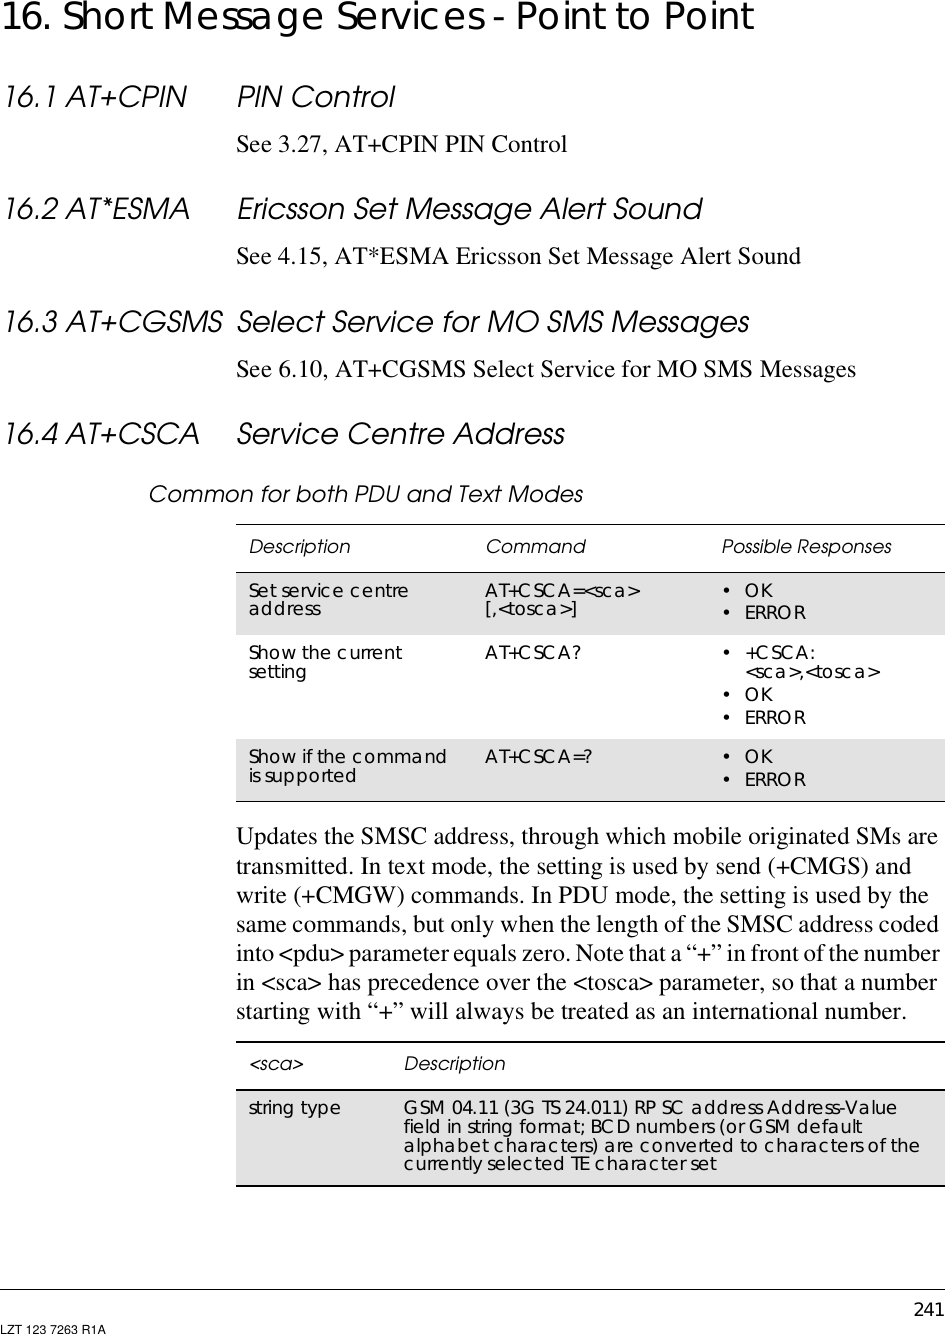 241LZT 123 7263 R1A16. Short Message Services - Point to Point16.1 AT+CPIN PIN ControlSee 3.27, AT+CPIN PIN Control16.2 AT*ESMA Ericsson Set Message Alert SoundSee 4.15, AT*ESMA Ericsson Set Message Alert Sound16.3 AT+CGSMS Select Service for MO SMS MessagesSee 6.10, AT+CGSMS Select Service for MO SMS Messages16.4 AT+CSCA Service Centre AddressCommon for both PDU and Text ModesUpdates the SMSC address, through which mobile originated SMs aretransmitted. In text mode, the setting is used by send (+CMGS) andwrite (+CMGW) commands. In PDU mode, the setting is used by thesame commands, but only when the length of the SMSC address codedinto &lt;pdu&gt; parameter equals zero. Note that a “+” in front of the numberin &lt;sca&gt; has precedence over the &lt;tosca&gt; parameter, so that a numberstarting with “+” will always be treated as an international number.Description Command Possible ResponsesSet service centreaddress AT+CSCA=&lt;sca&gt;[,&lt;tosca&gt;] •OK•ERRORShow the currentsetting AT+CSCA? •+CSCA:&lt;sca&gt;,&lt;tosca&gt;•OK•ERRORShow if the commandis supported AT+CSCA=? •OK•ERROR&lt;sca&gt; Descriptionstring type GSM 04.11 (3G TS 24.011) RP SC address Address-Valuefield in string format; BCD numbers (or GSM defaultalphabet characters) are converted to characters of thecurrently selected TE character set